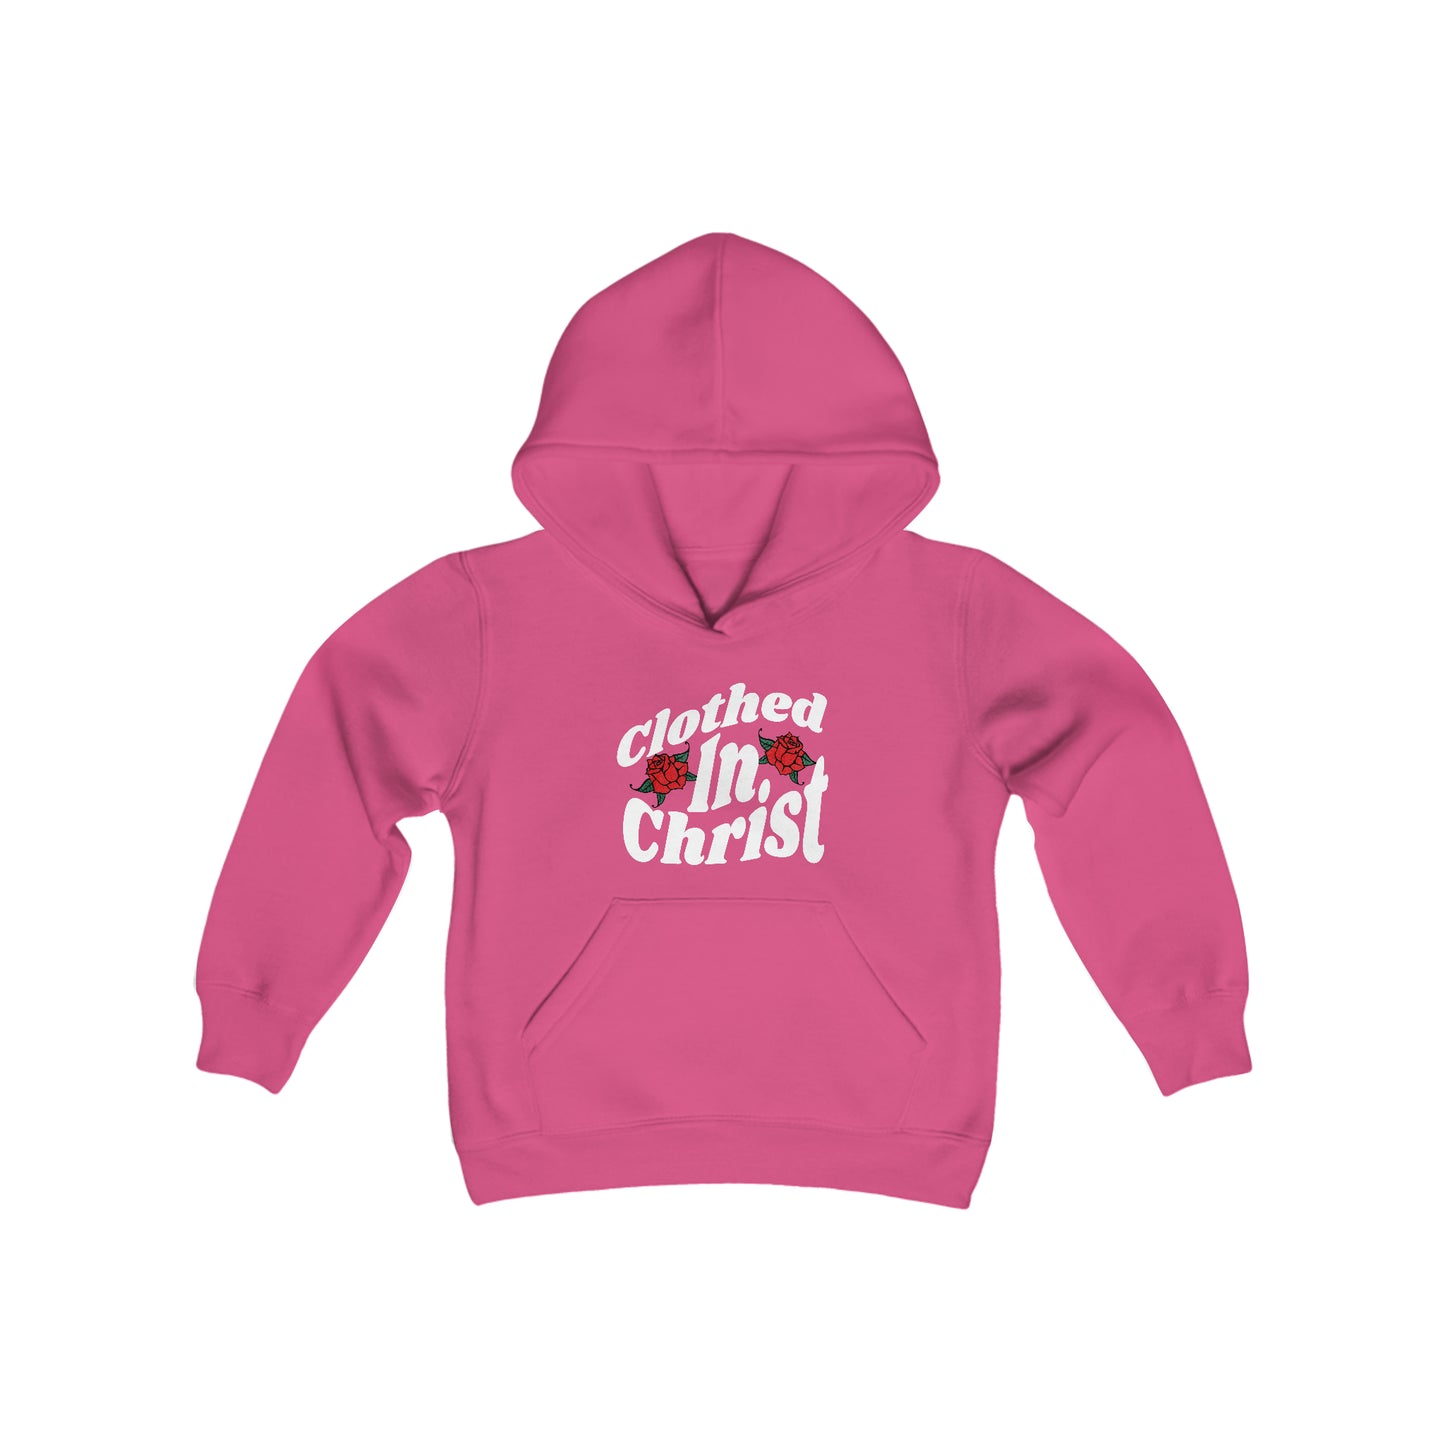 Youth Collection Clothed In Christ Hoodie